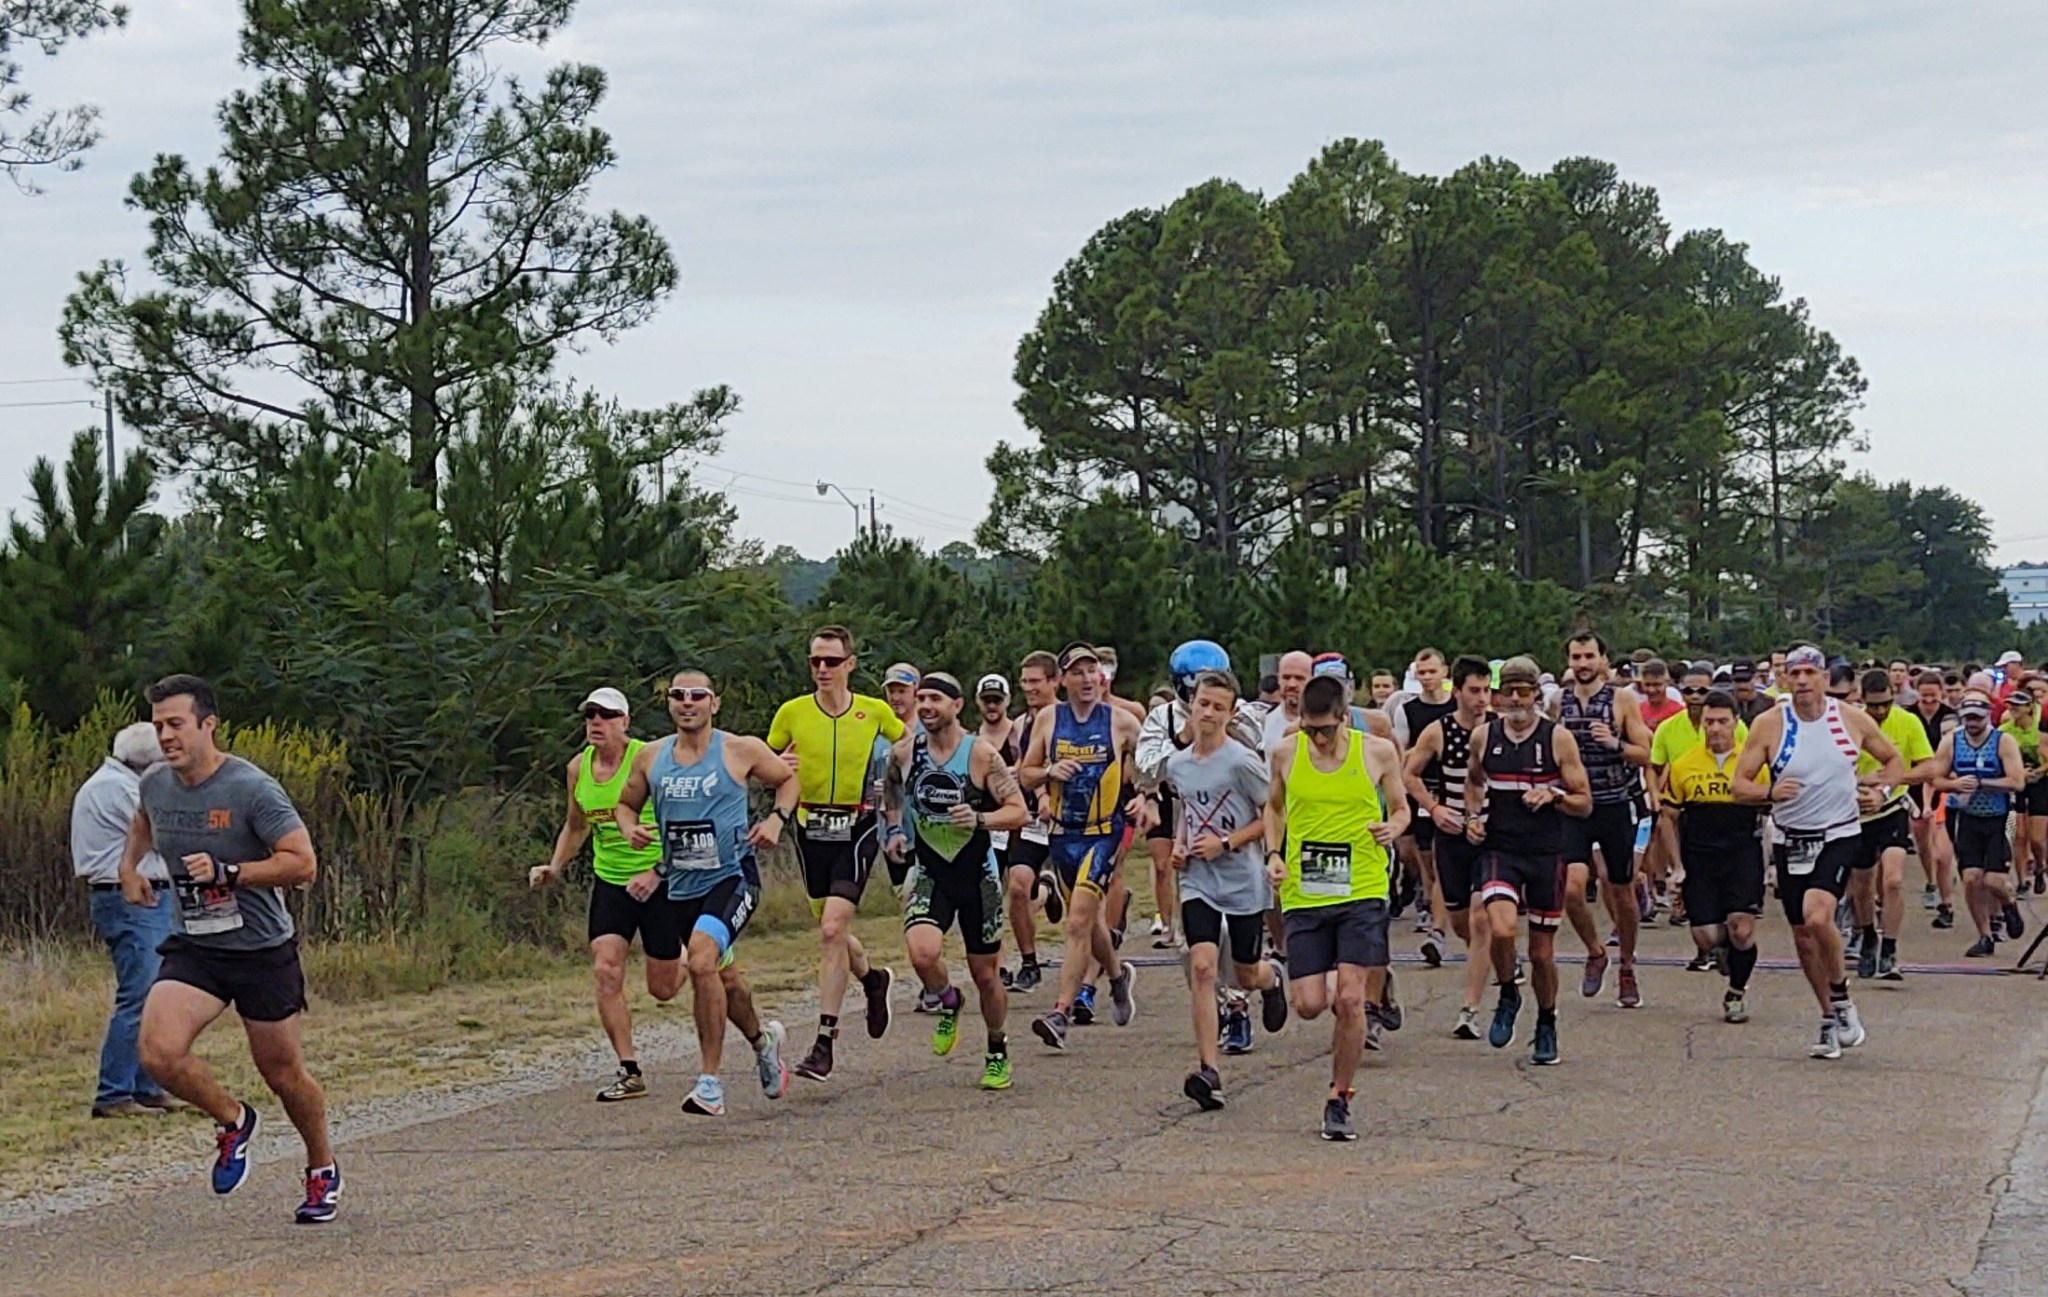 A group of 200 athletes from seven states compete in the 8th annual Racin’ the Station duathlon Sept. 28.